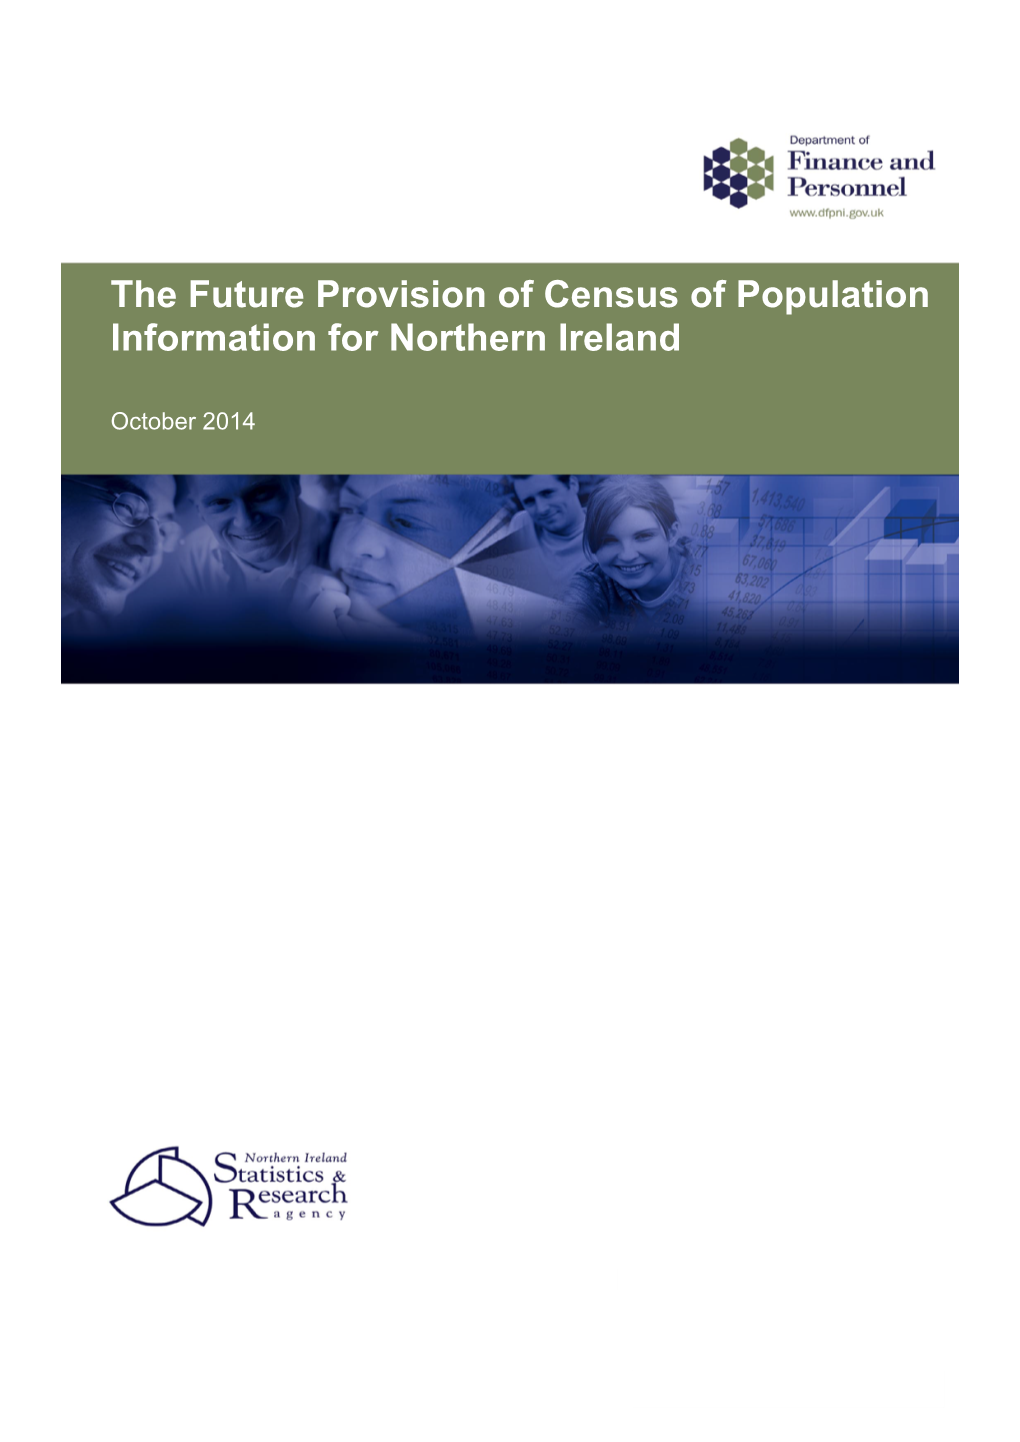 The Future Provision of Census of Population Information for Northern Ireland